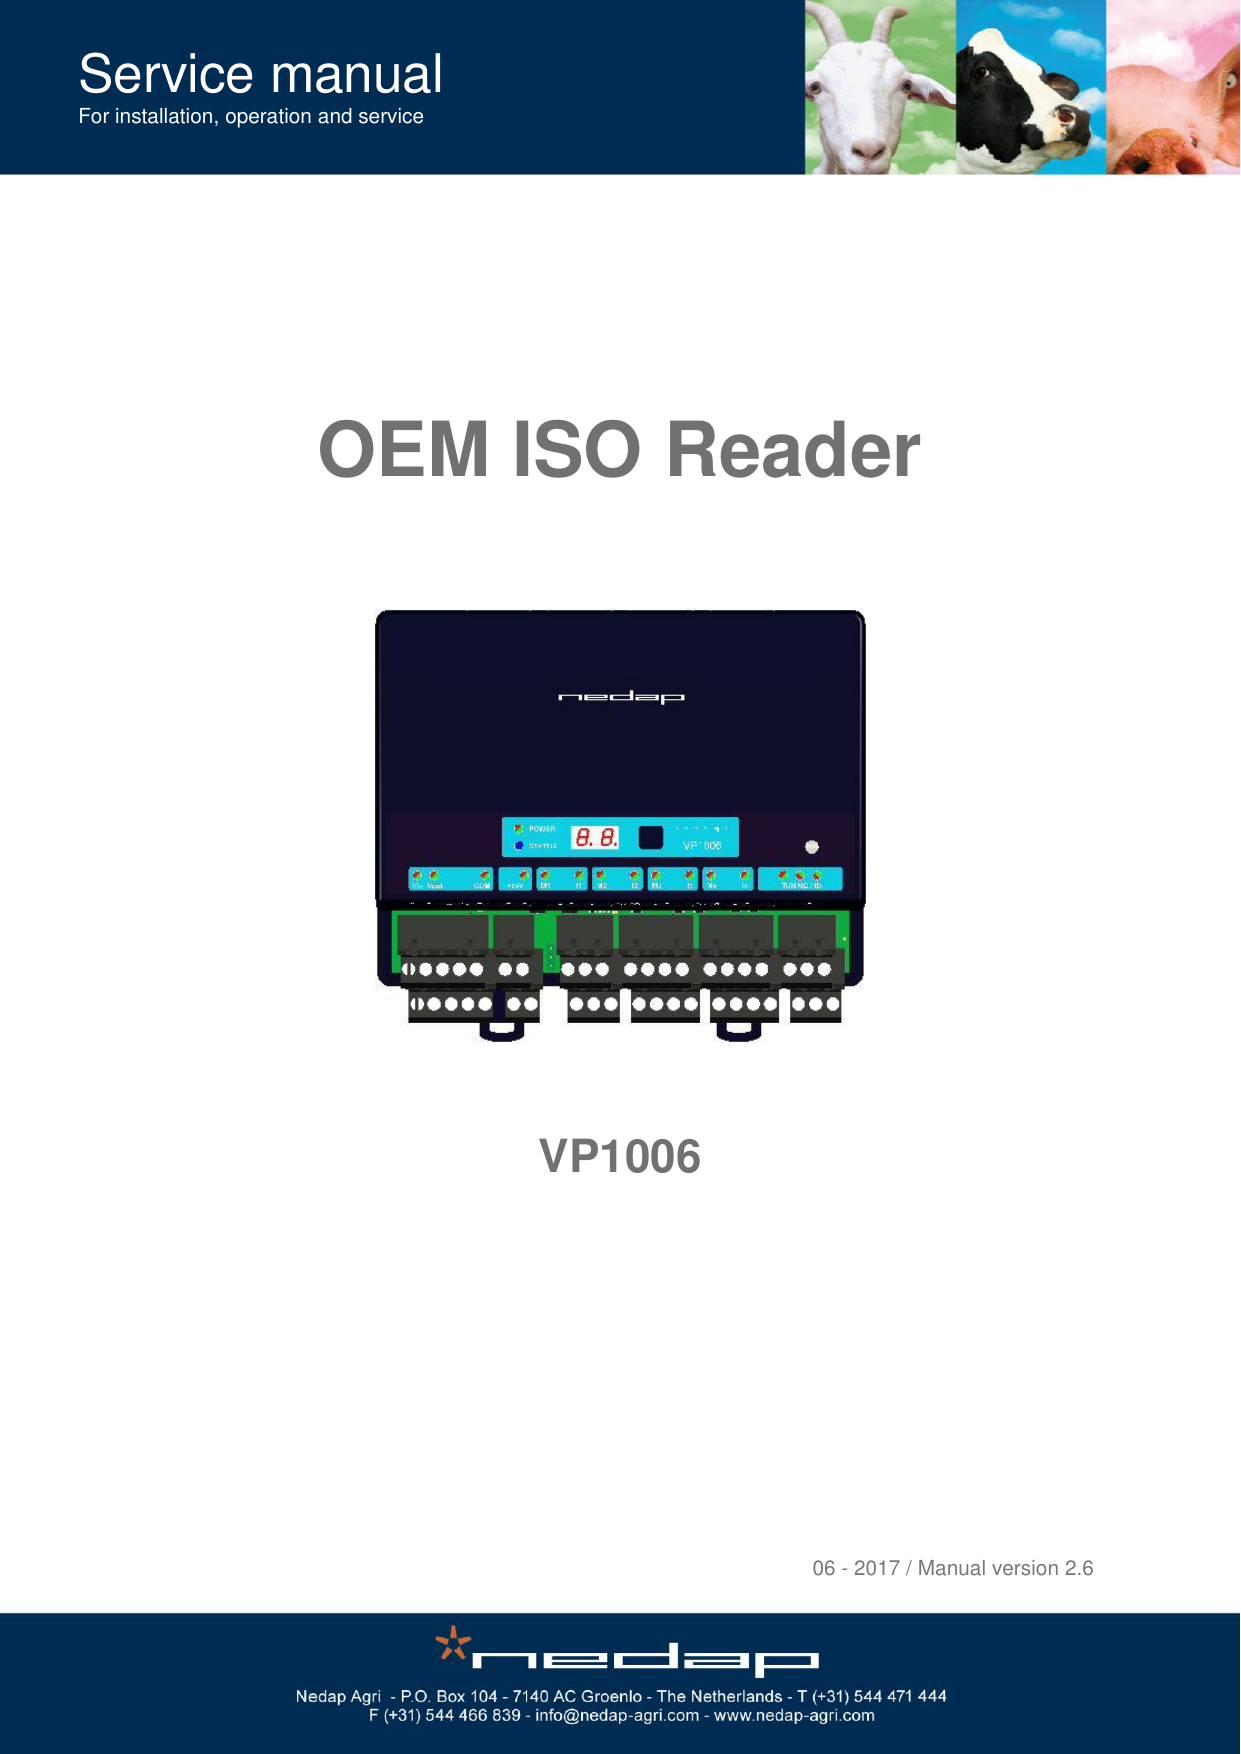   Service manual For installation, operation and service         OEM ISO Reader      VP1006                                    06 - 2017 / Manual version 2.6 